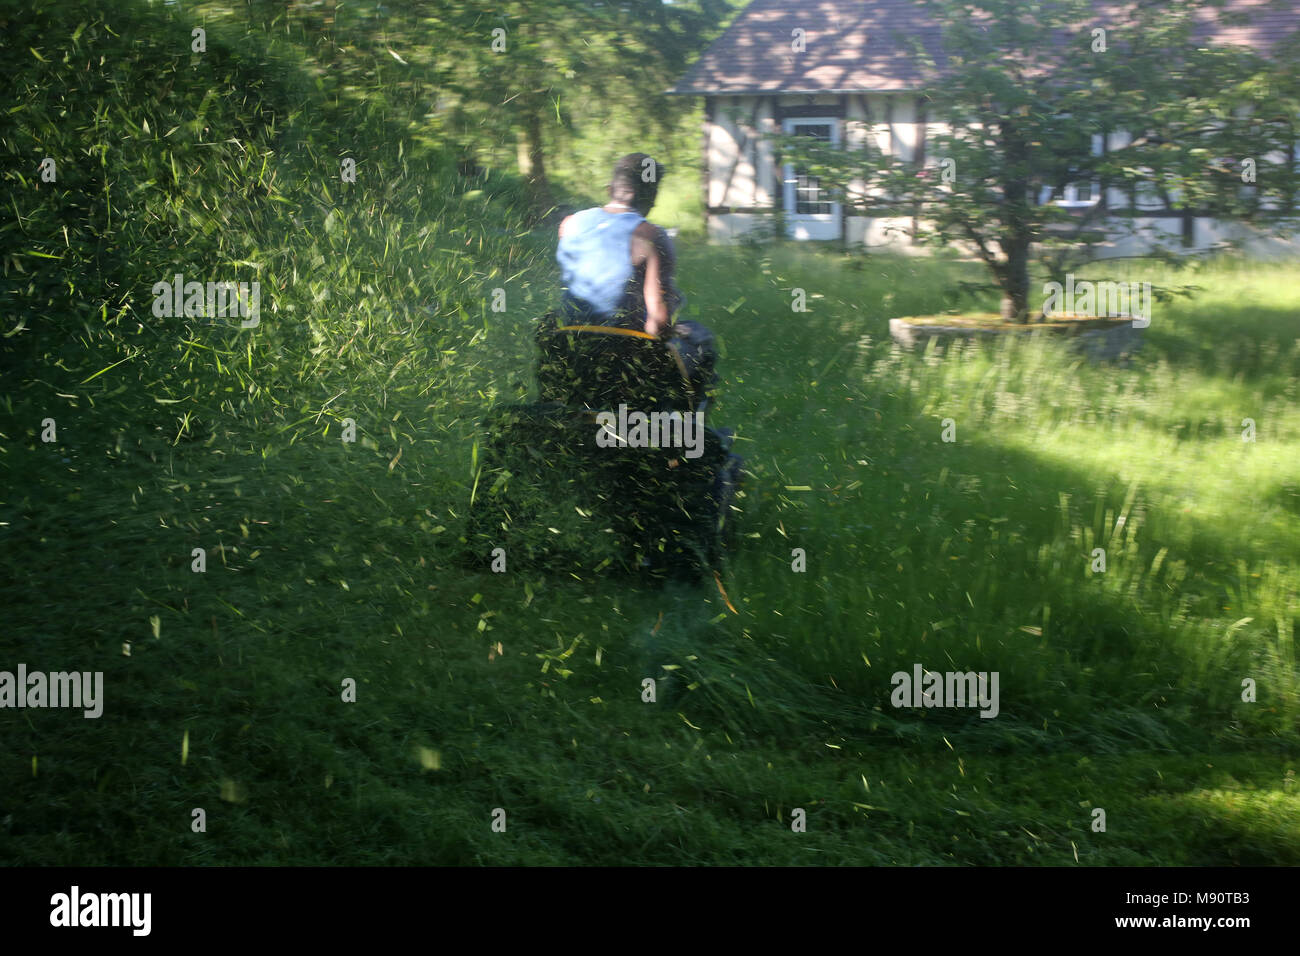 Lawn mowing. Eure, France. Stock Photo